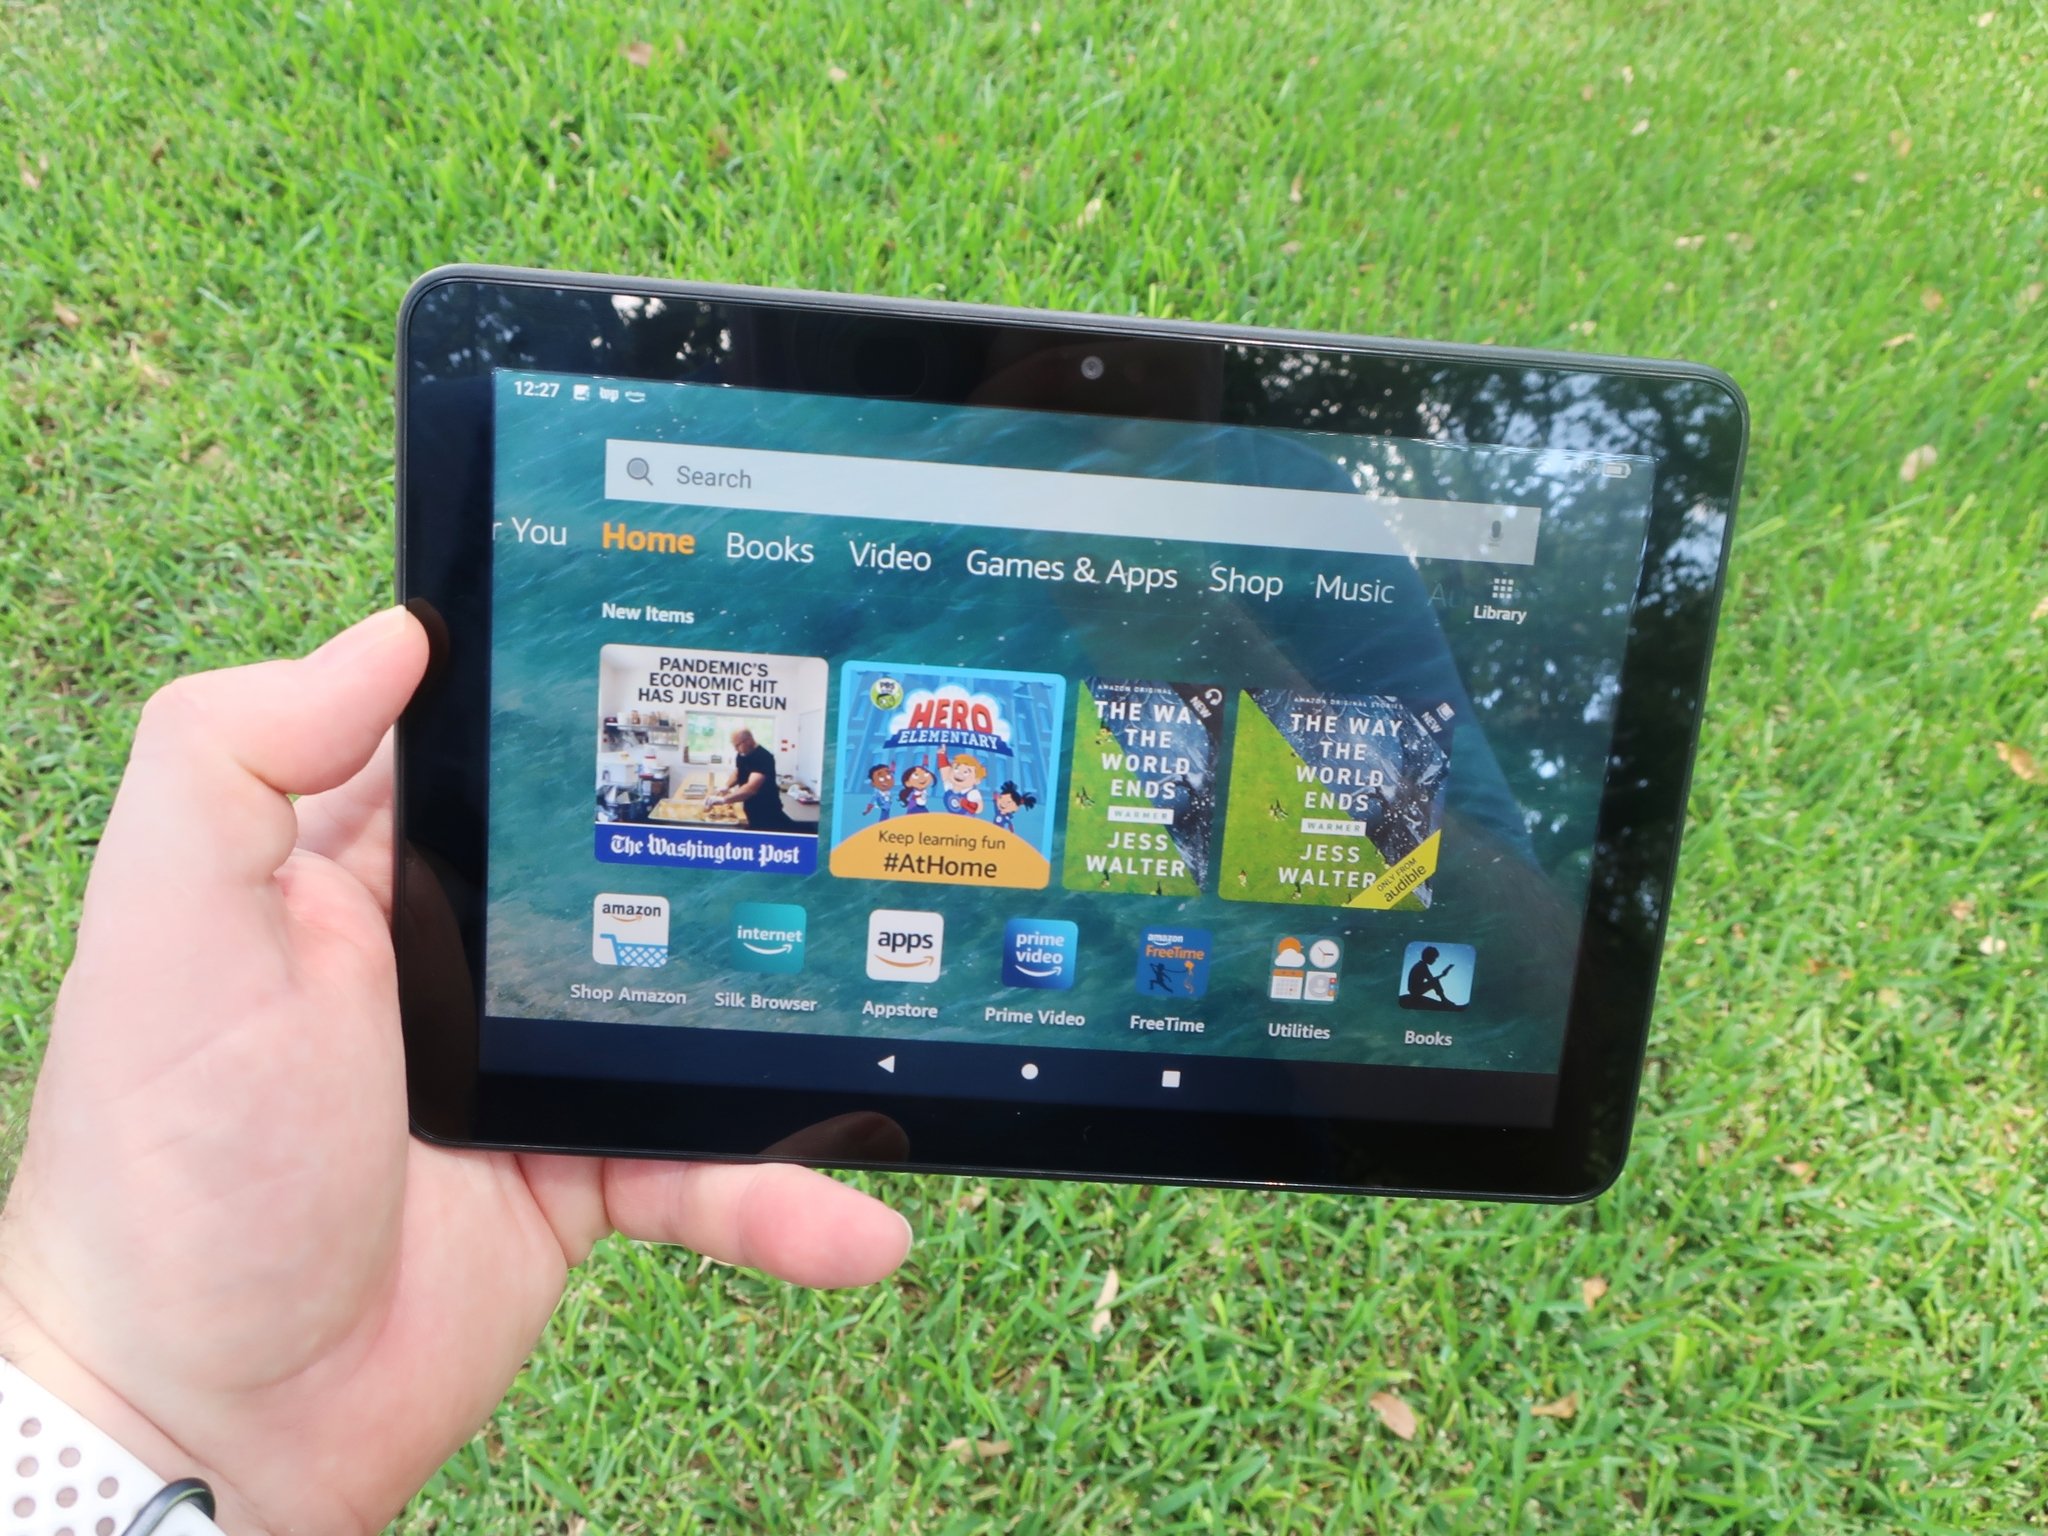 Until Android 12L, Amazon's Fire Tablets were the only Android tablets that really mattered